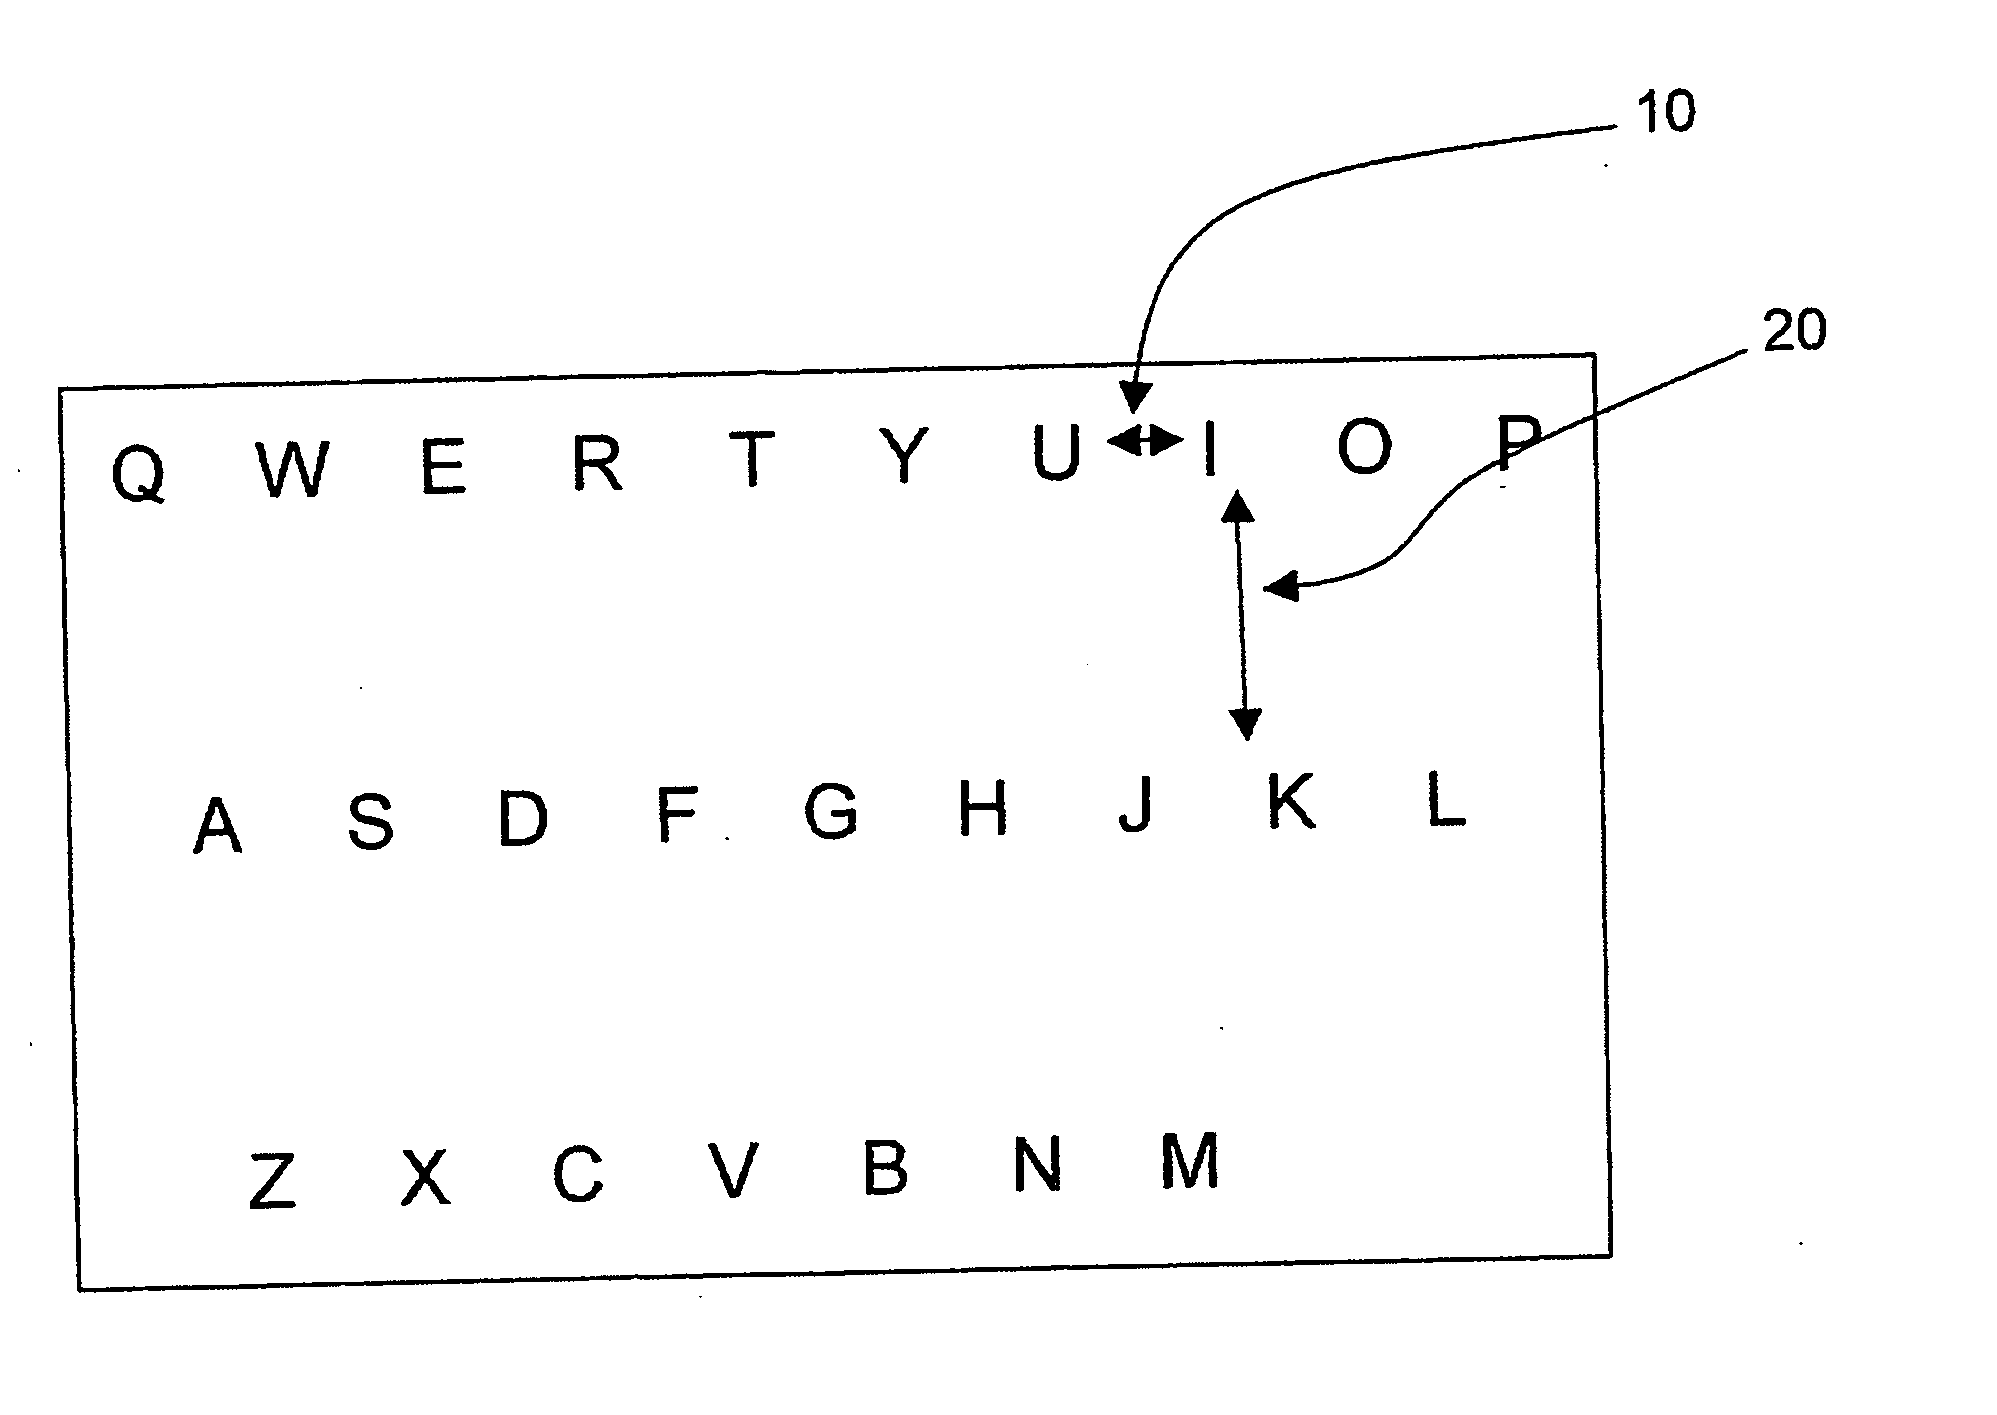 Finger activated reduced keyboard and a method for performing text input